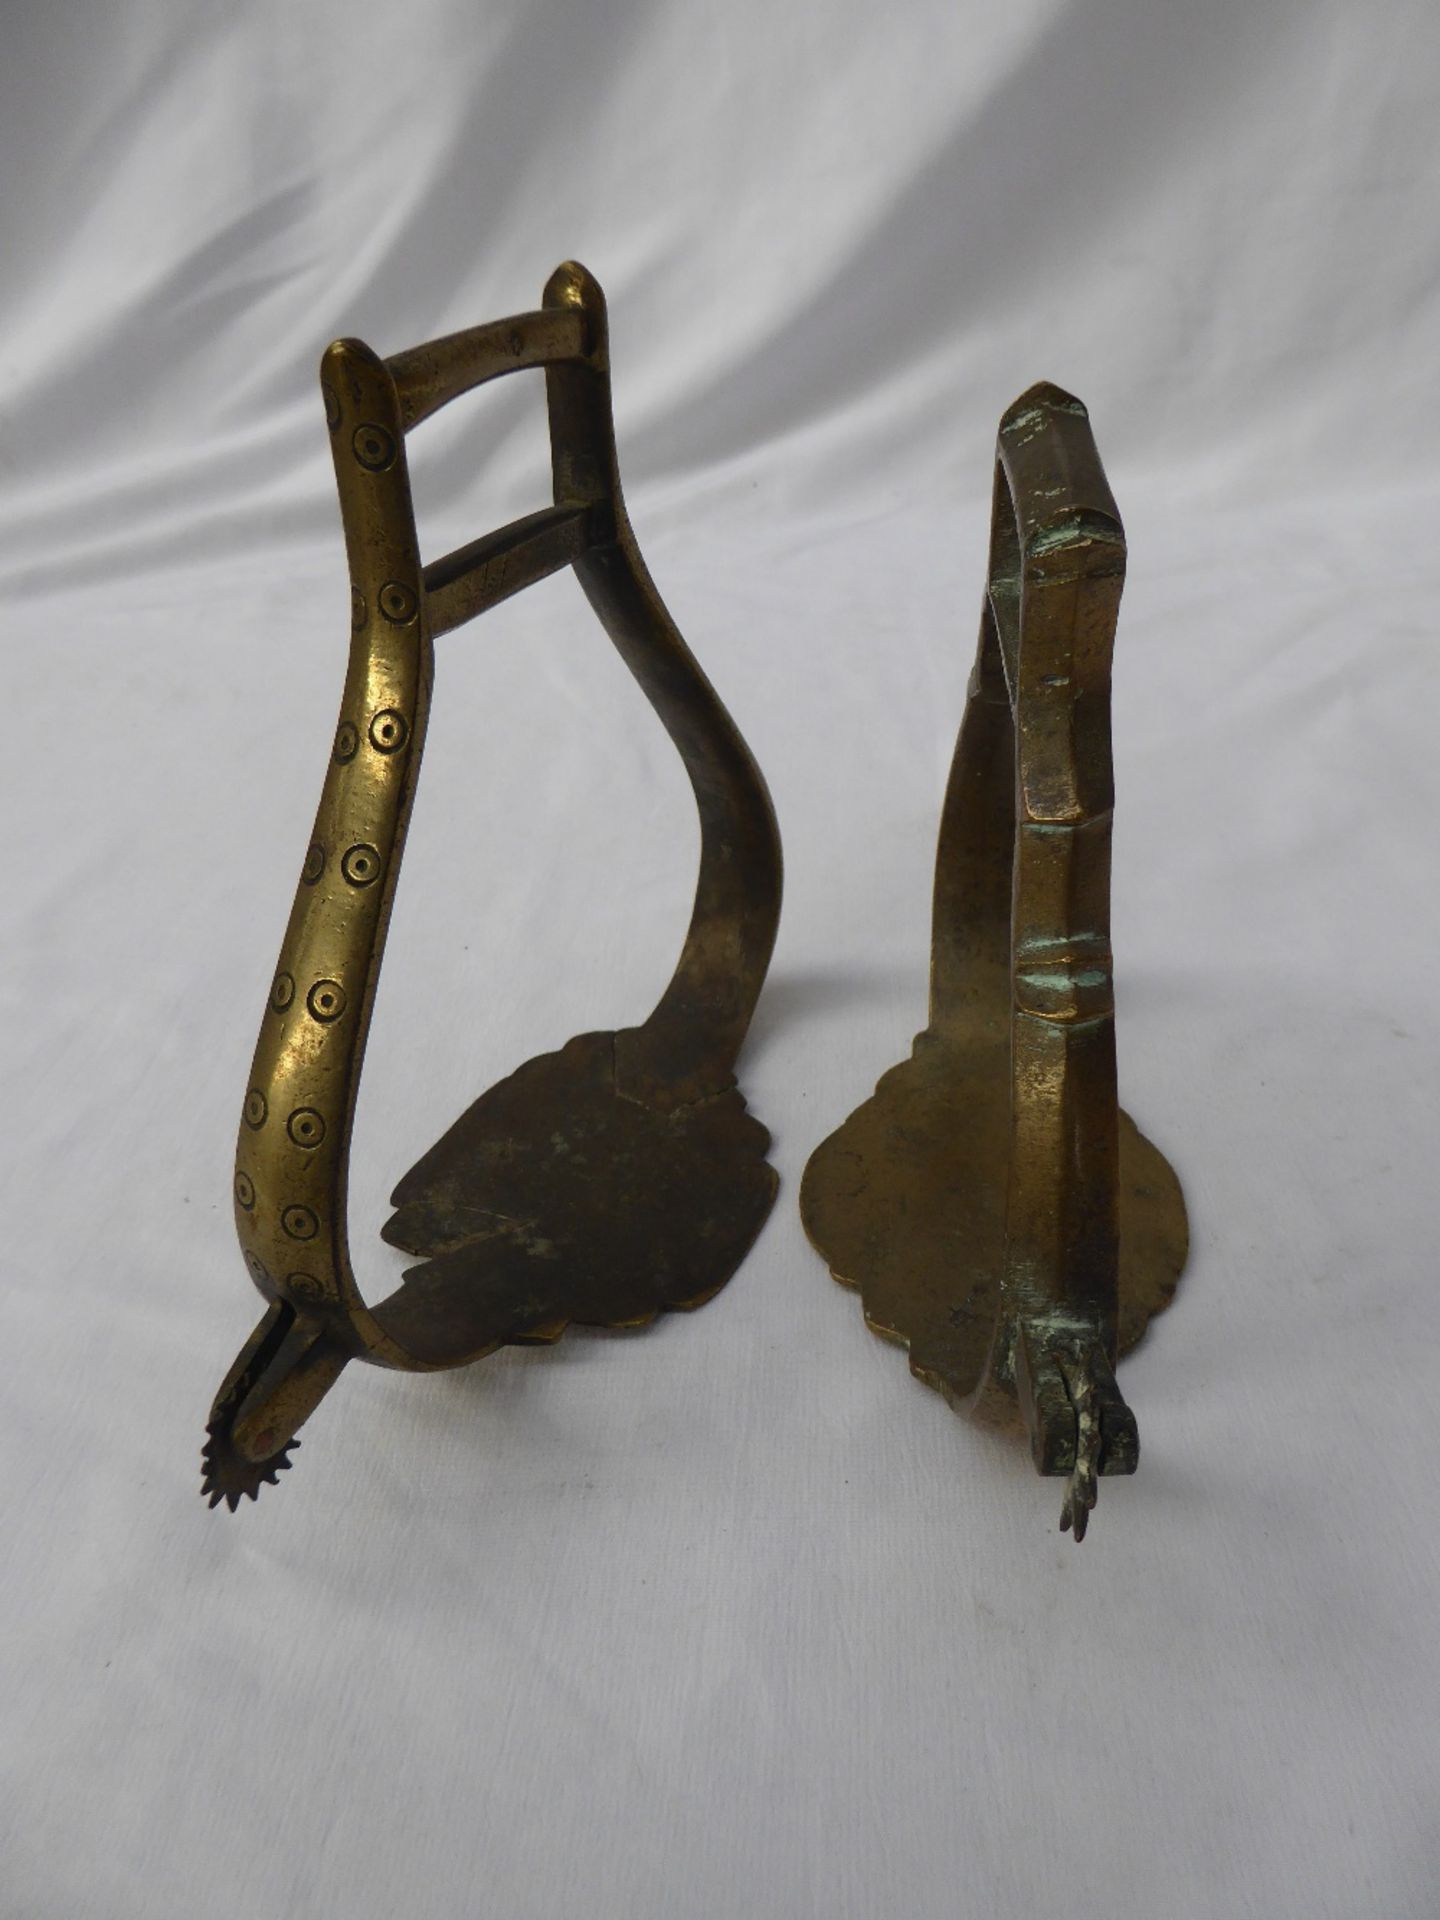 2 South American stirrups with rowelled spurs incorporated in the sides. - Image 4 of 5